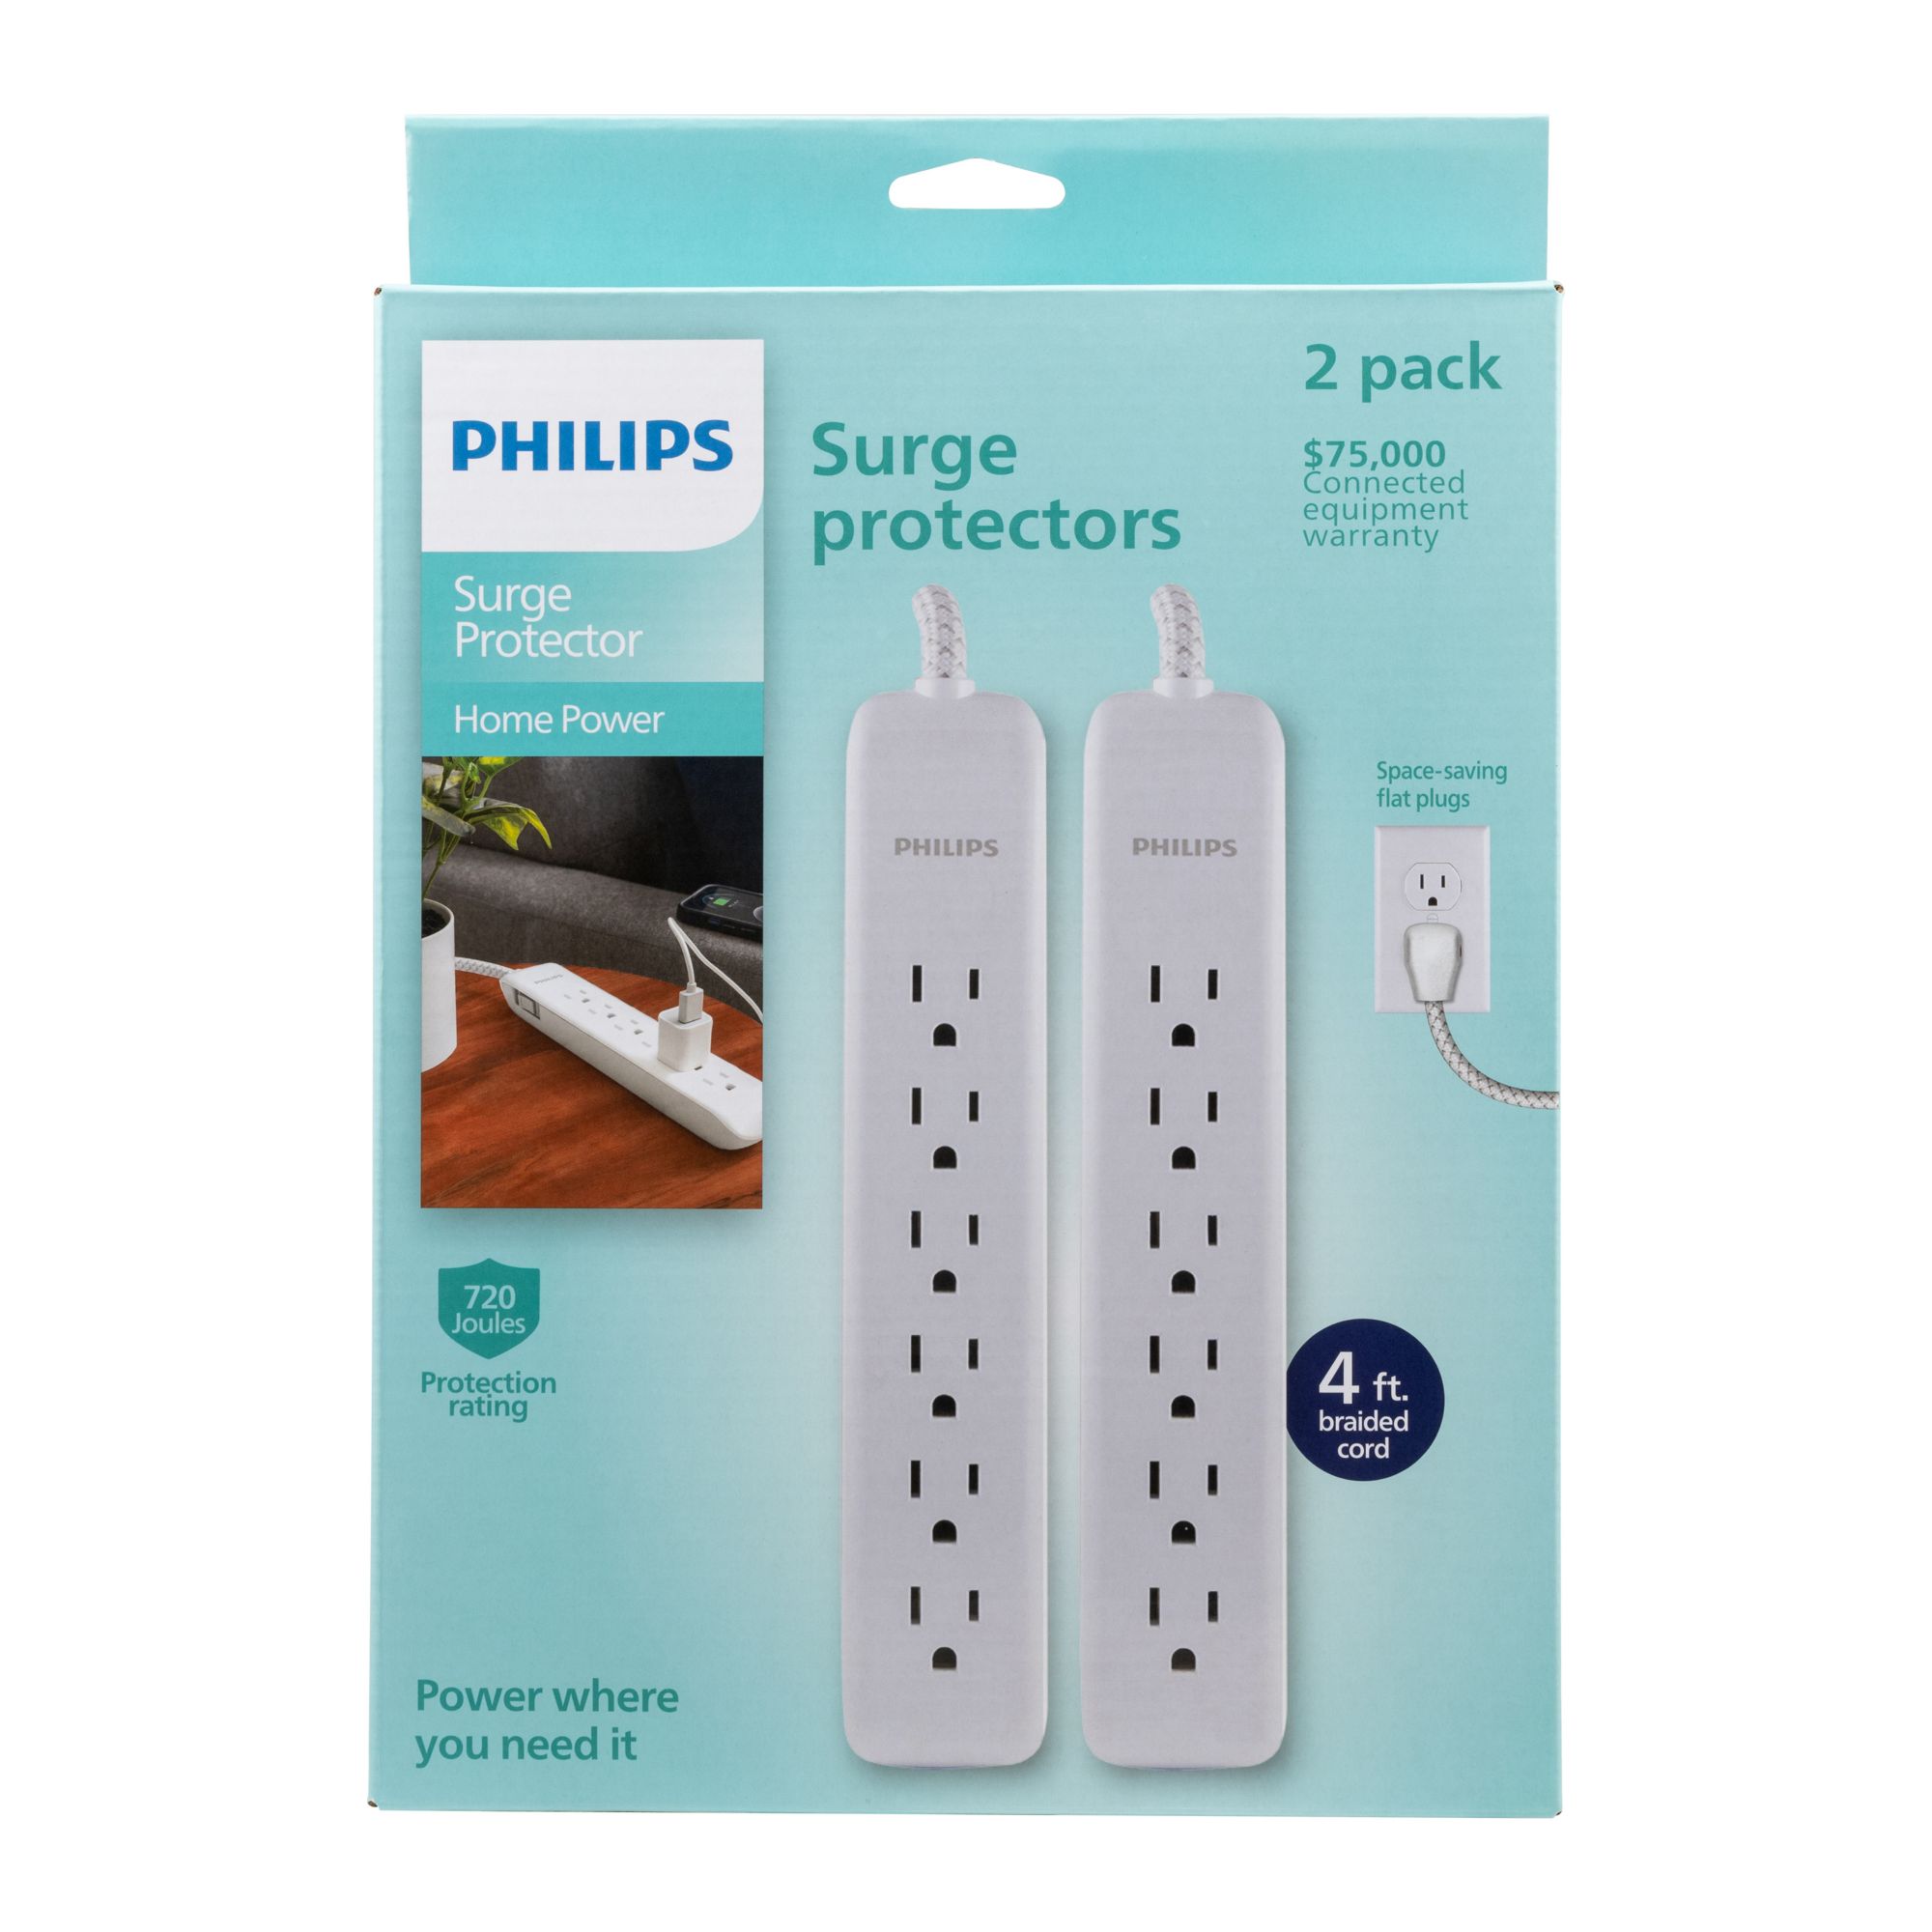 Power Strip Cover (2 pack)